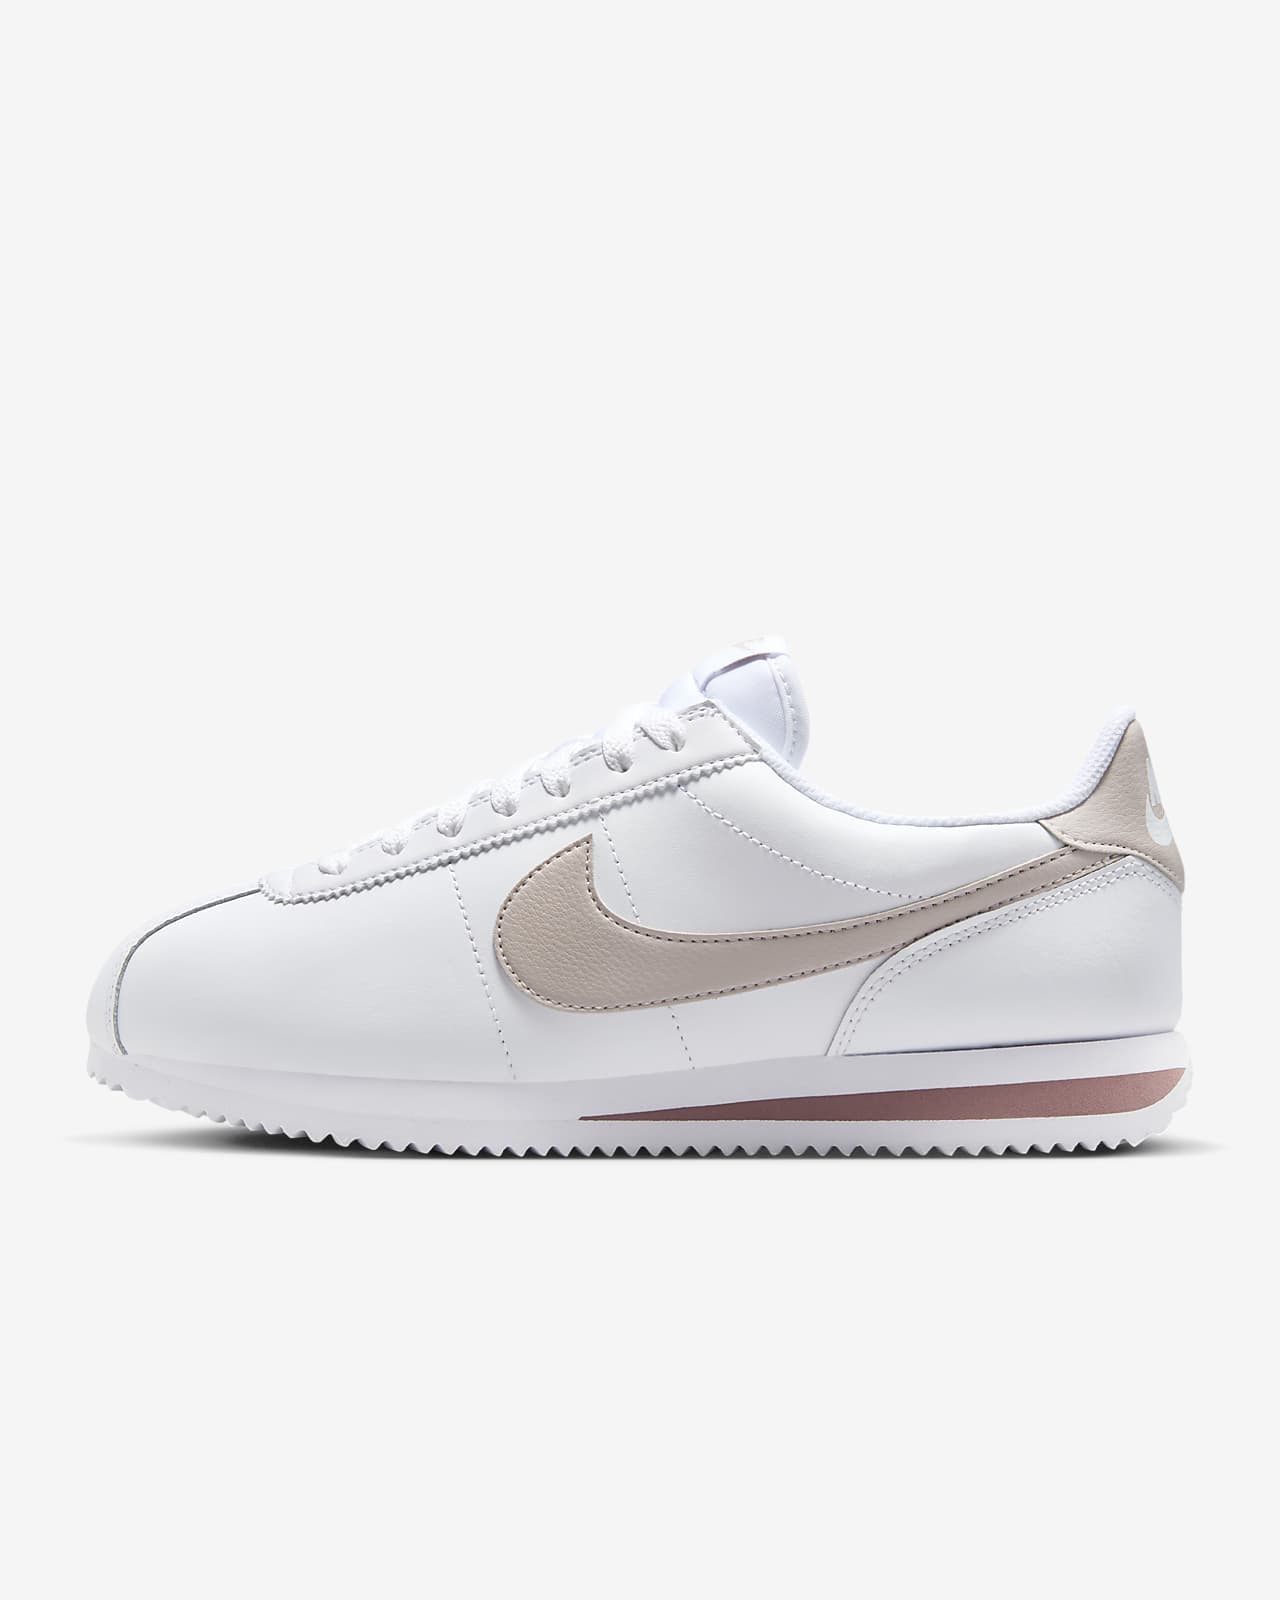 Nike Cortez Returns in Three Colors for Summer